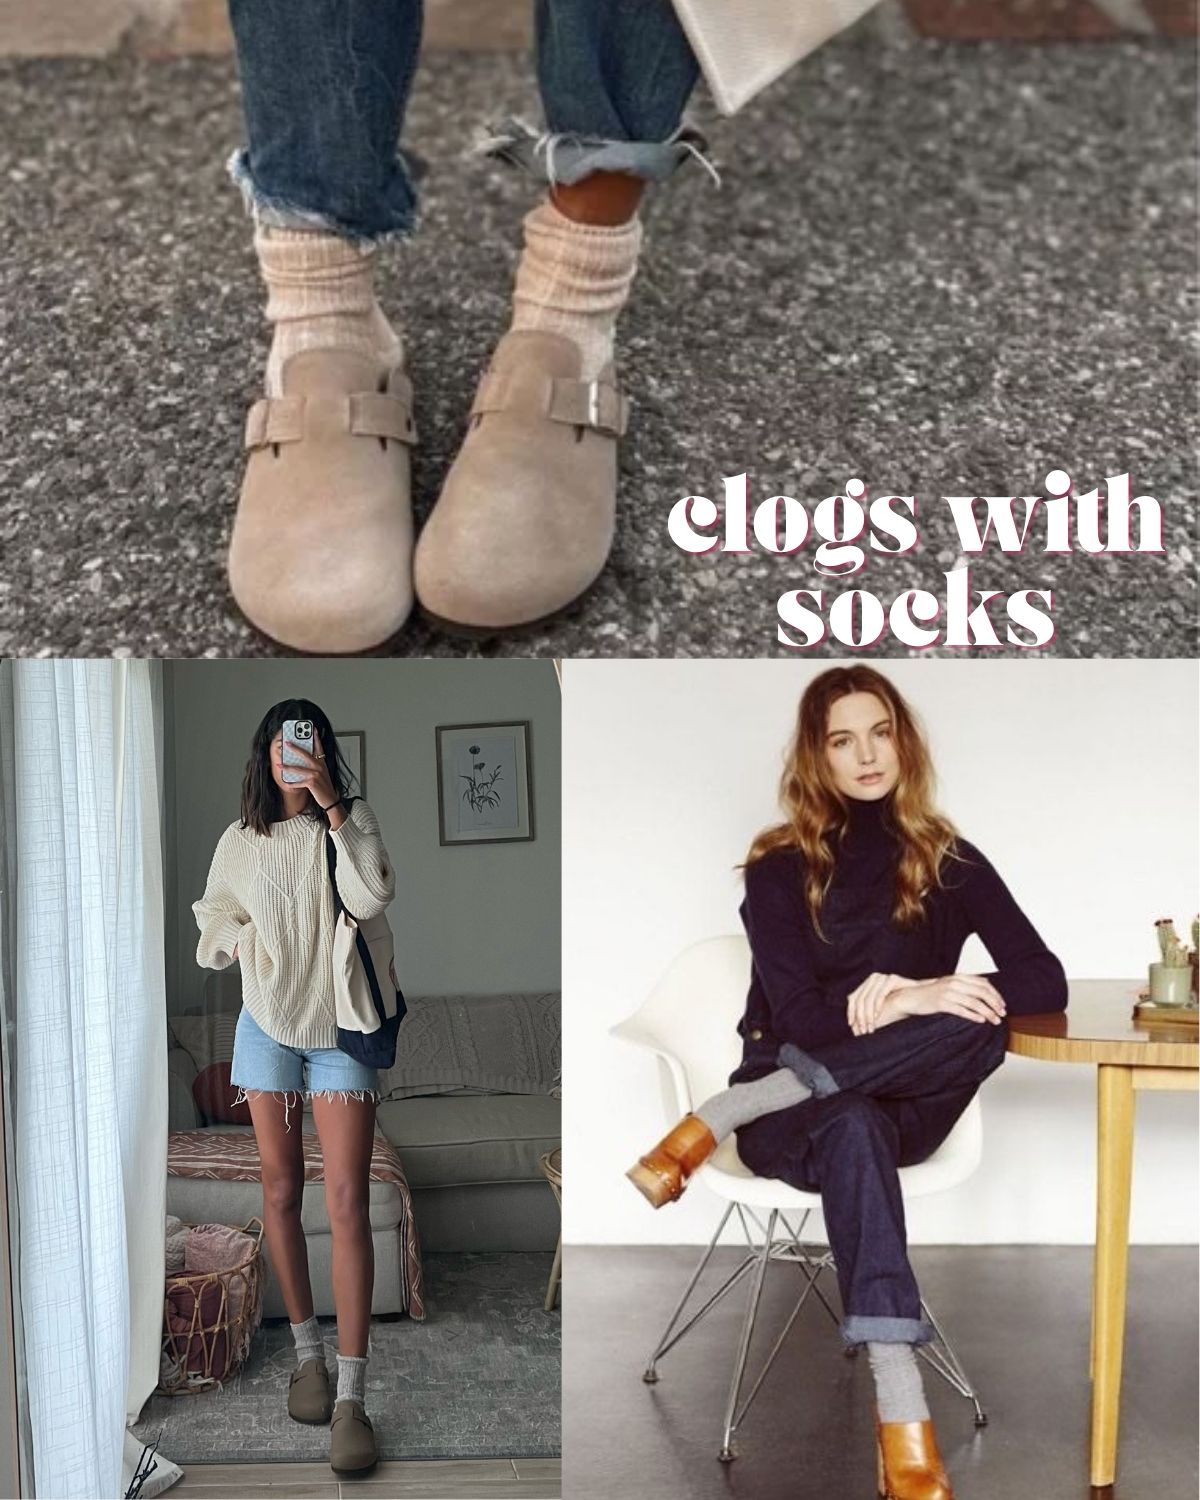 Three examples of outfits of clogs and socks